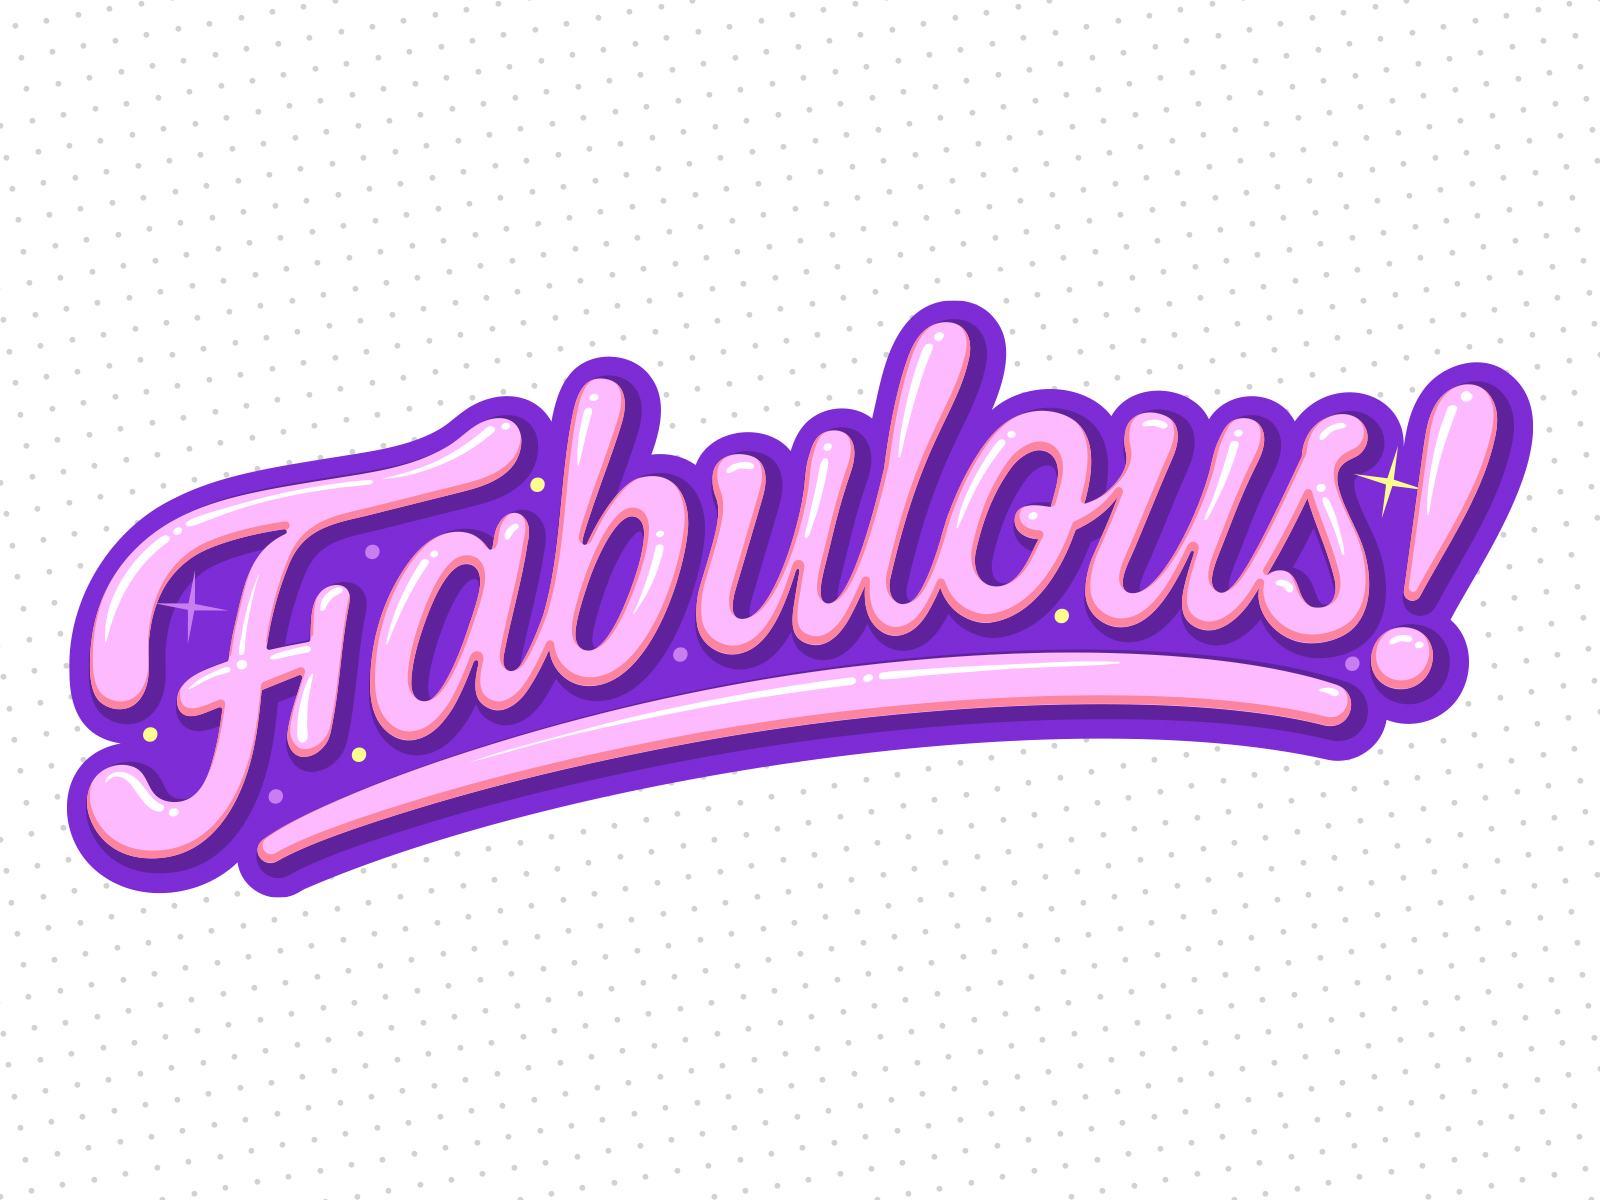 fabulous text art person copy and paste